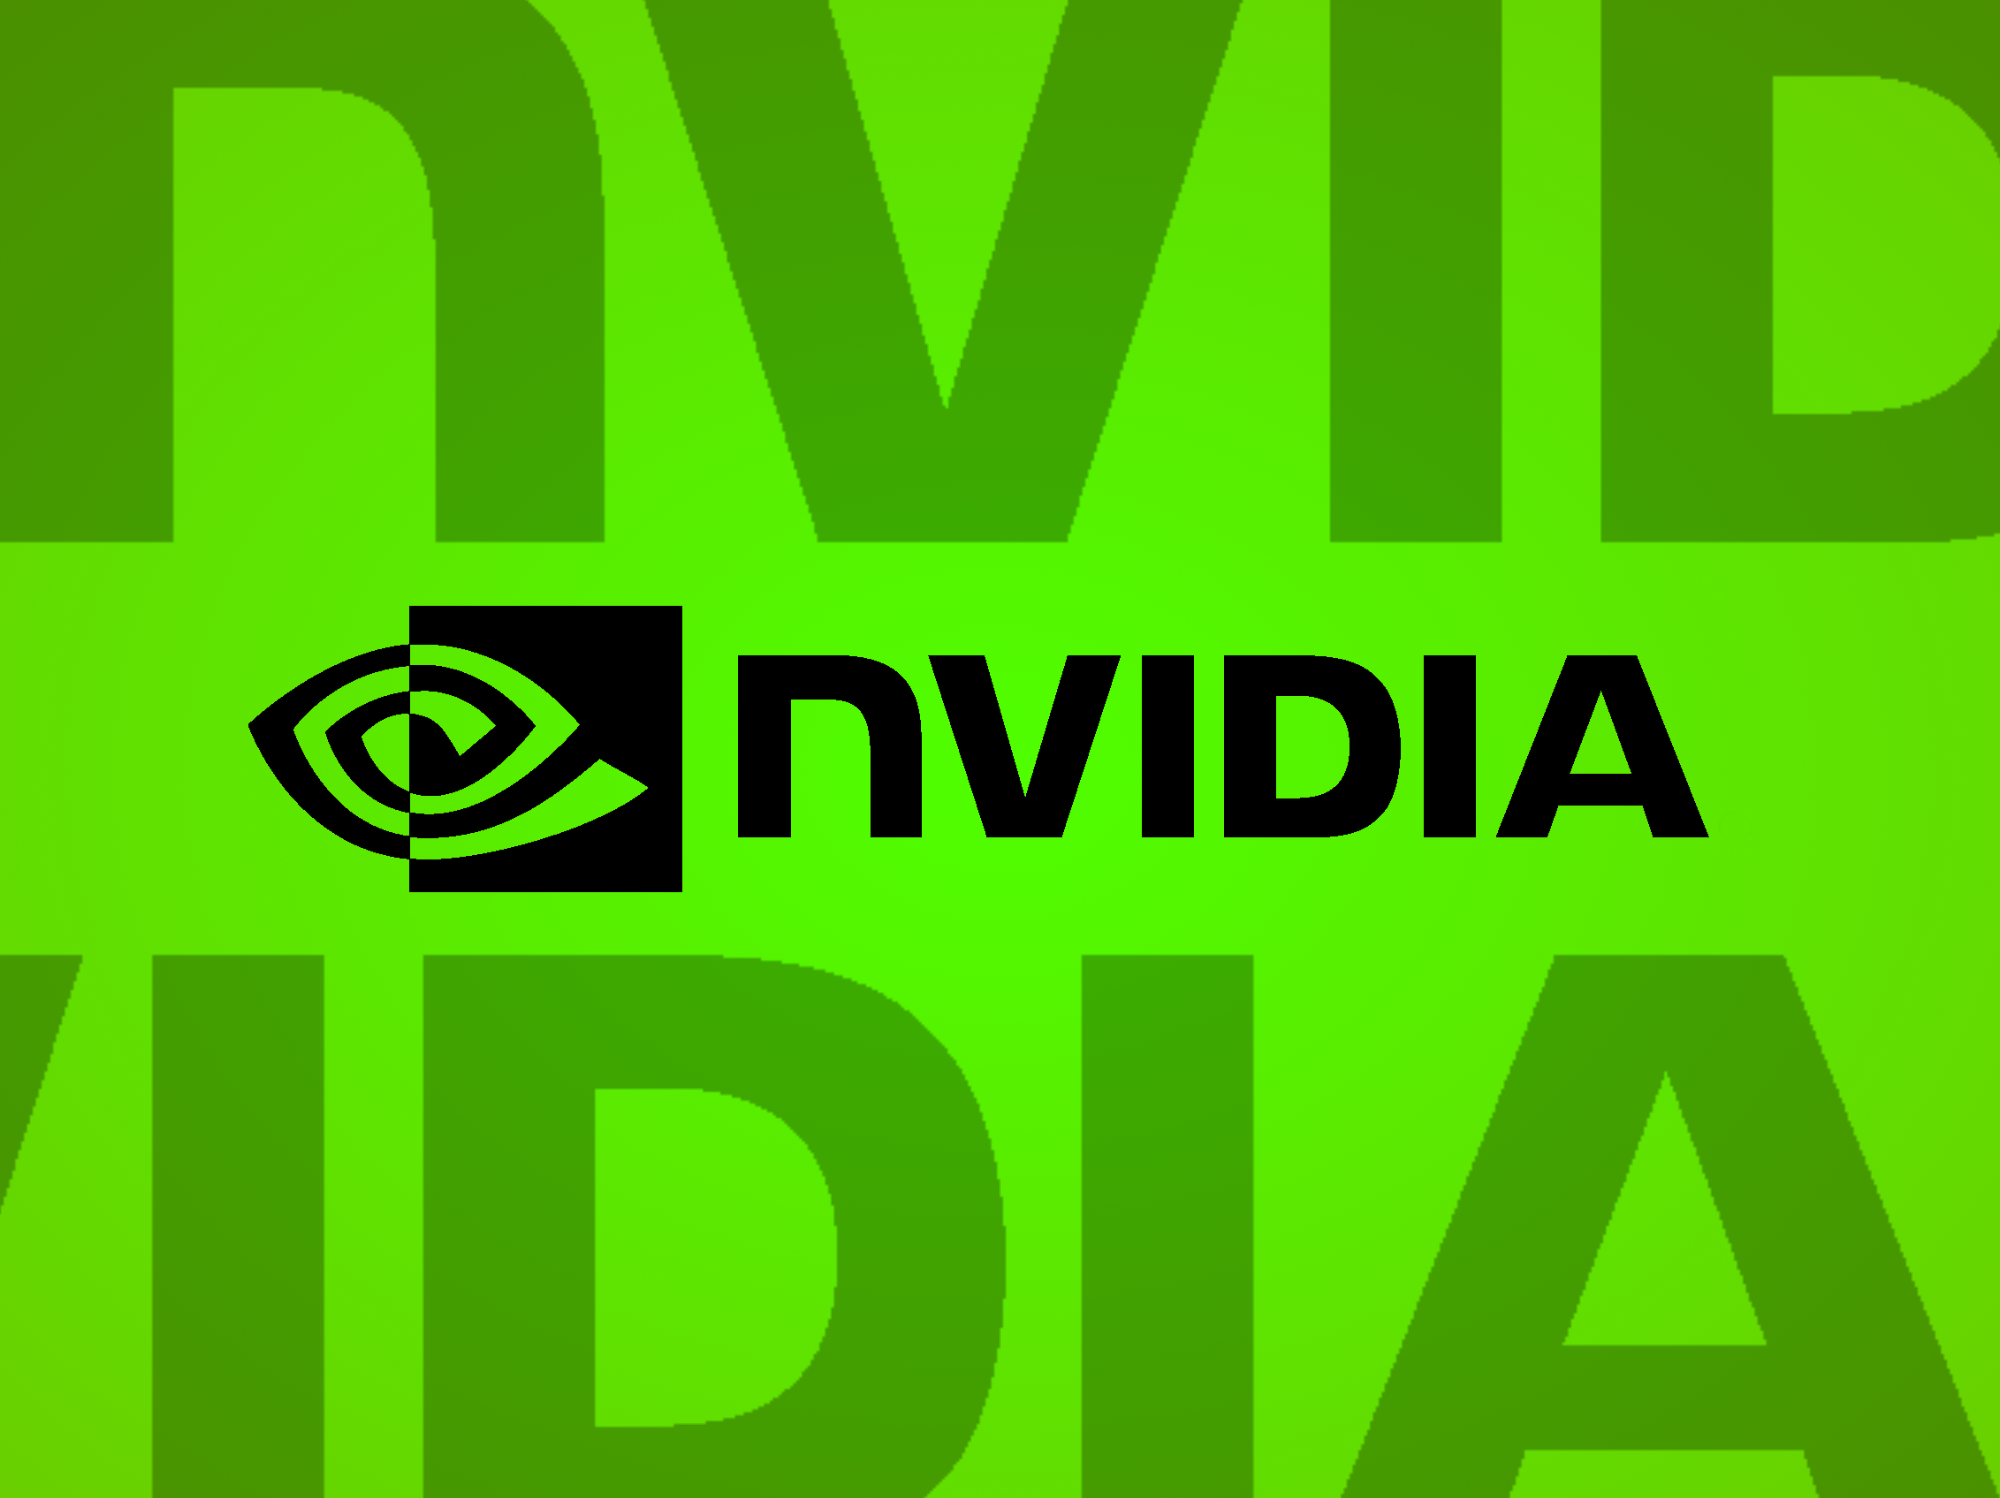 Nvidia GeForce Now database leak may have revealed many unreleased Windows PC games, Super Mario Bros. Wii via Dolphin Emulator and more